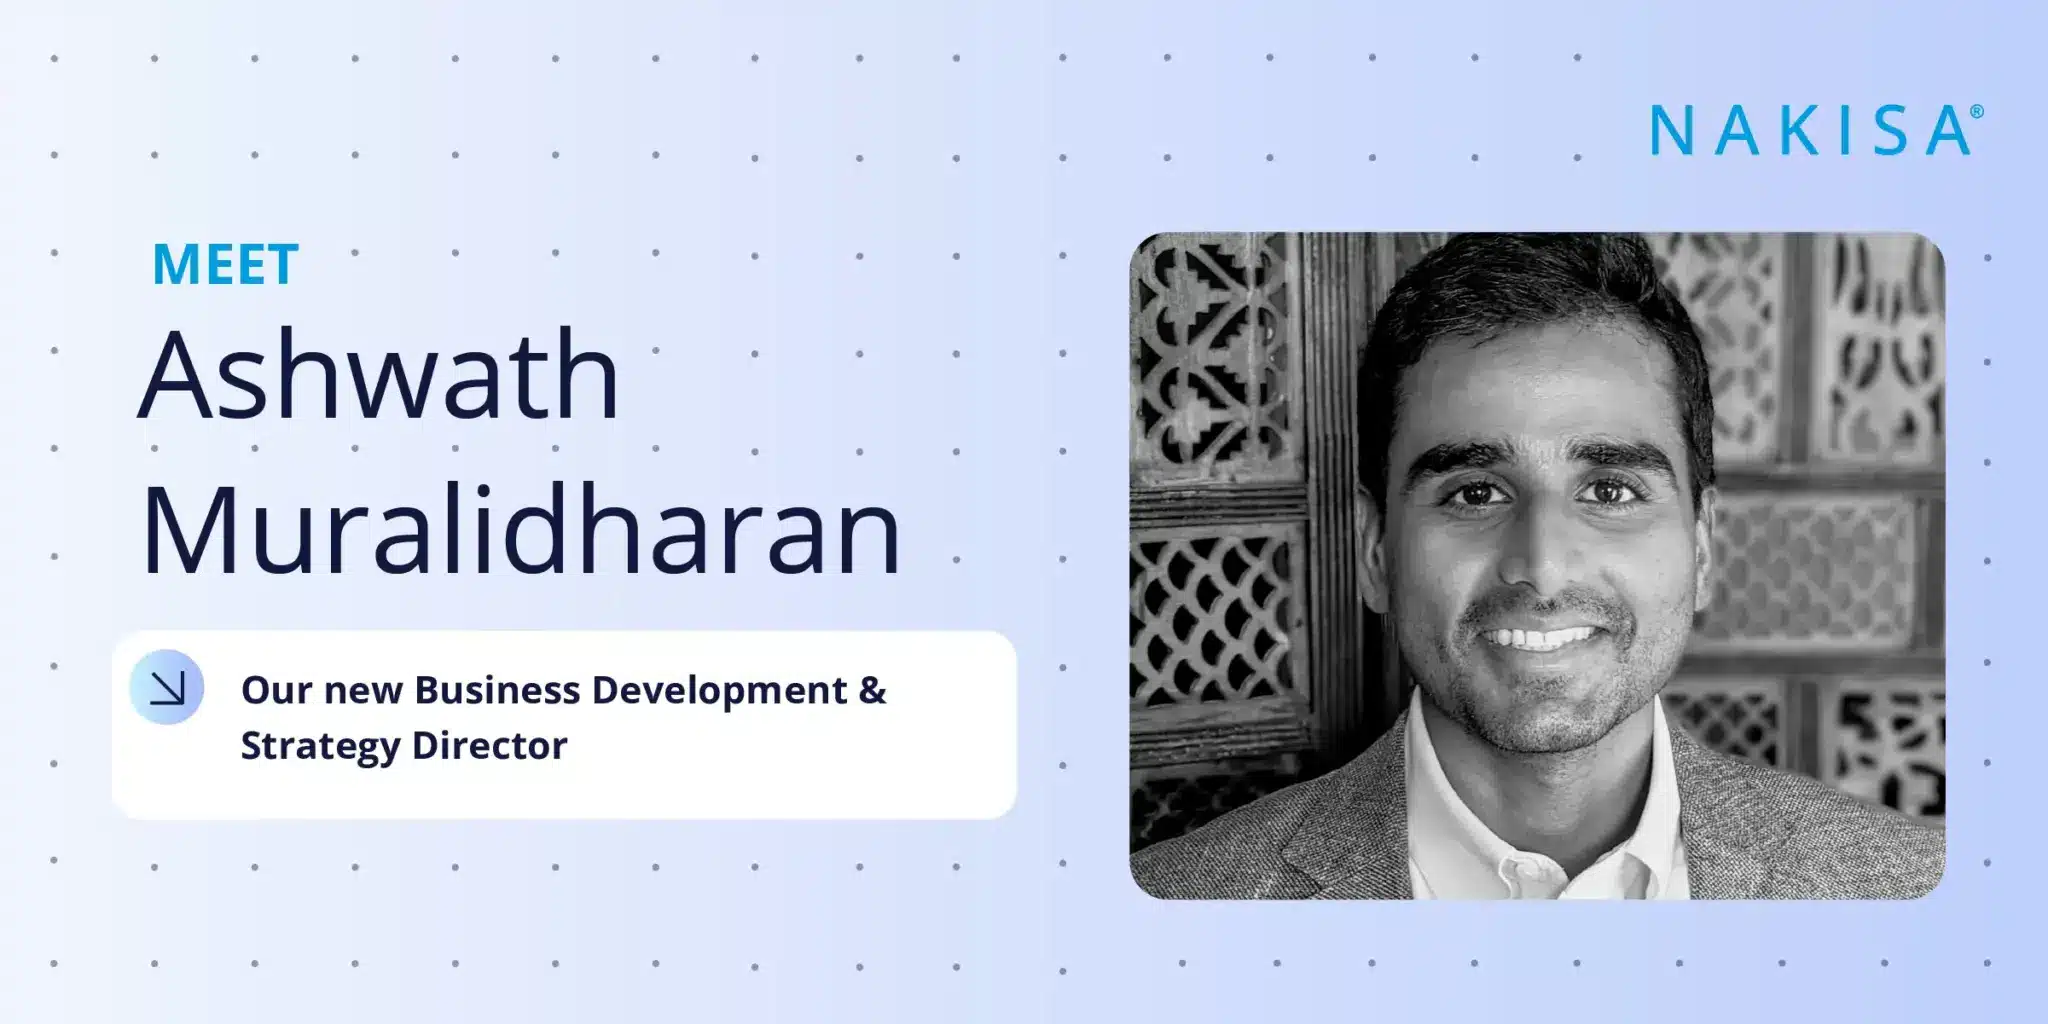 We are happy to announce that Ashwath Muralidharan has joined our team as Business Development & Strategy Director